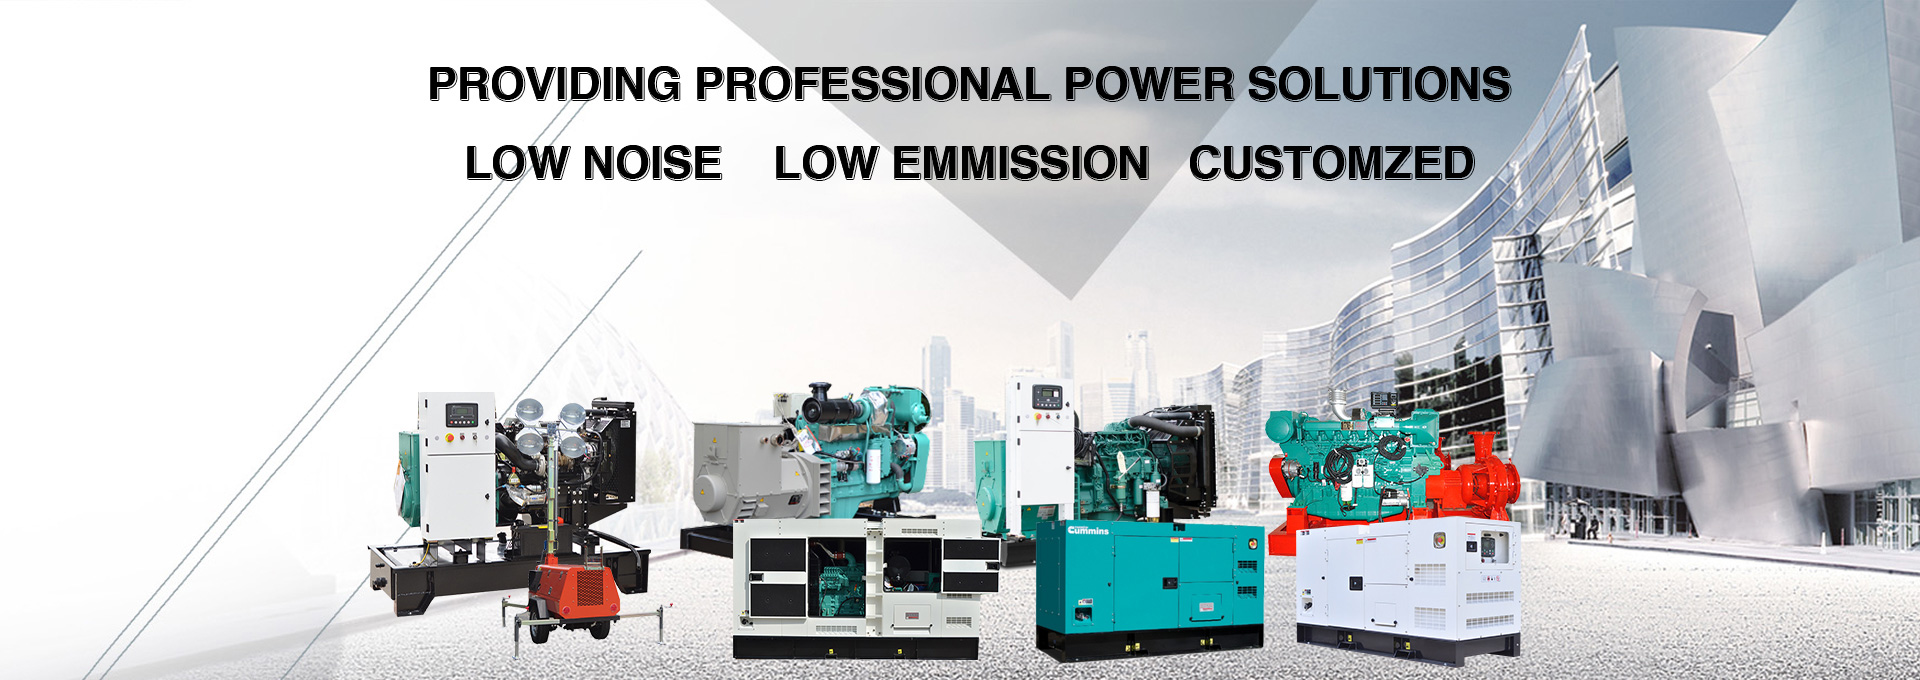 Providing-Professional-Power-Solutions-Banner-03